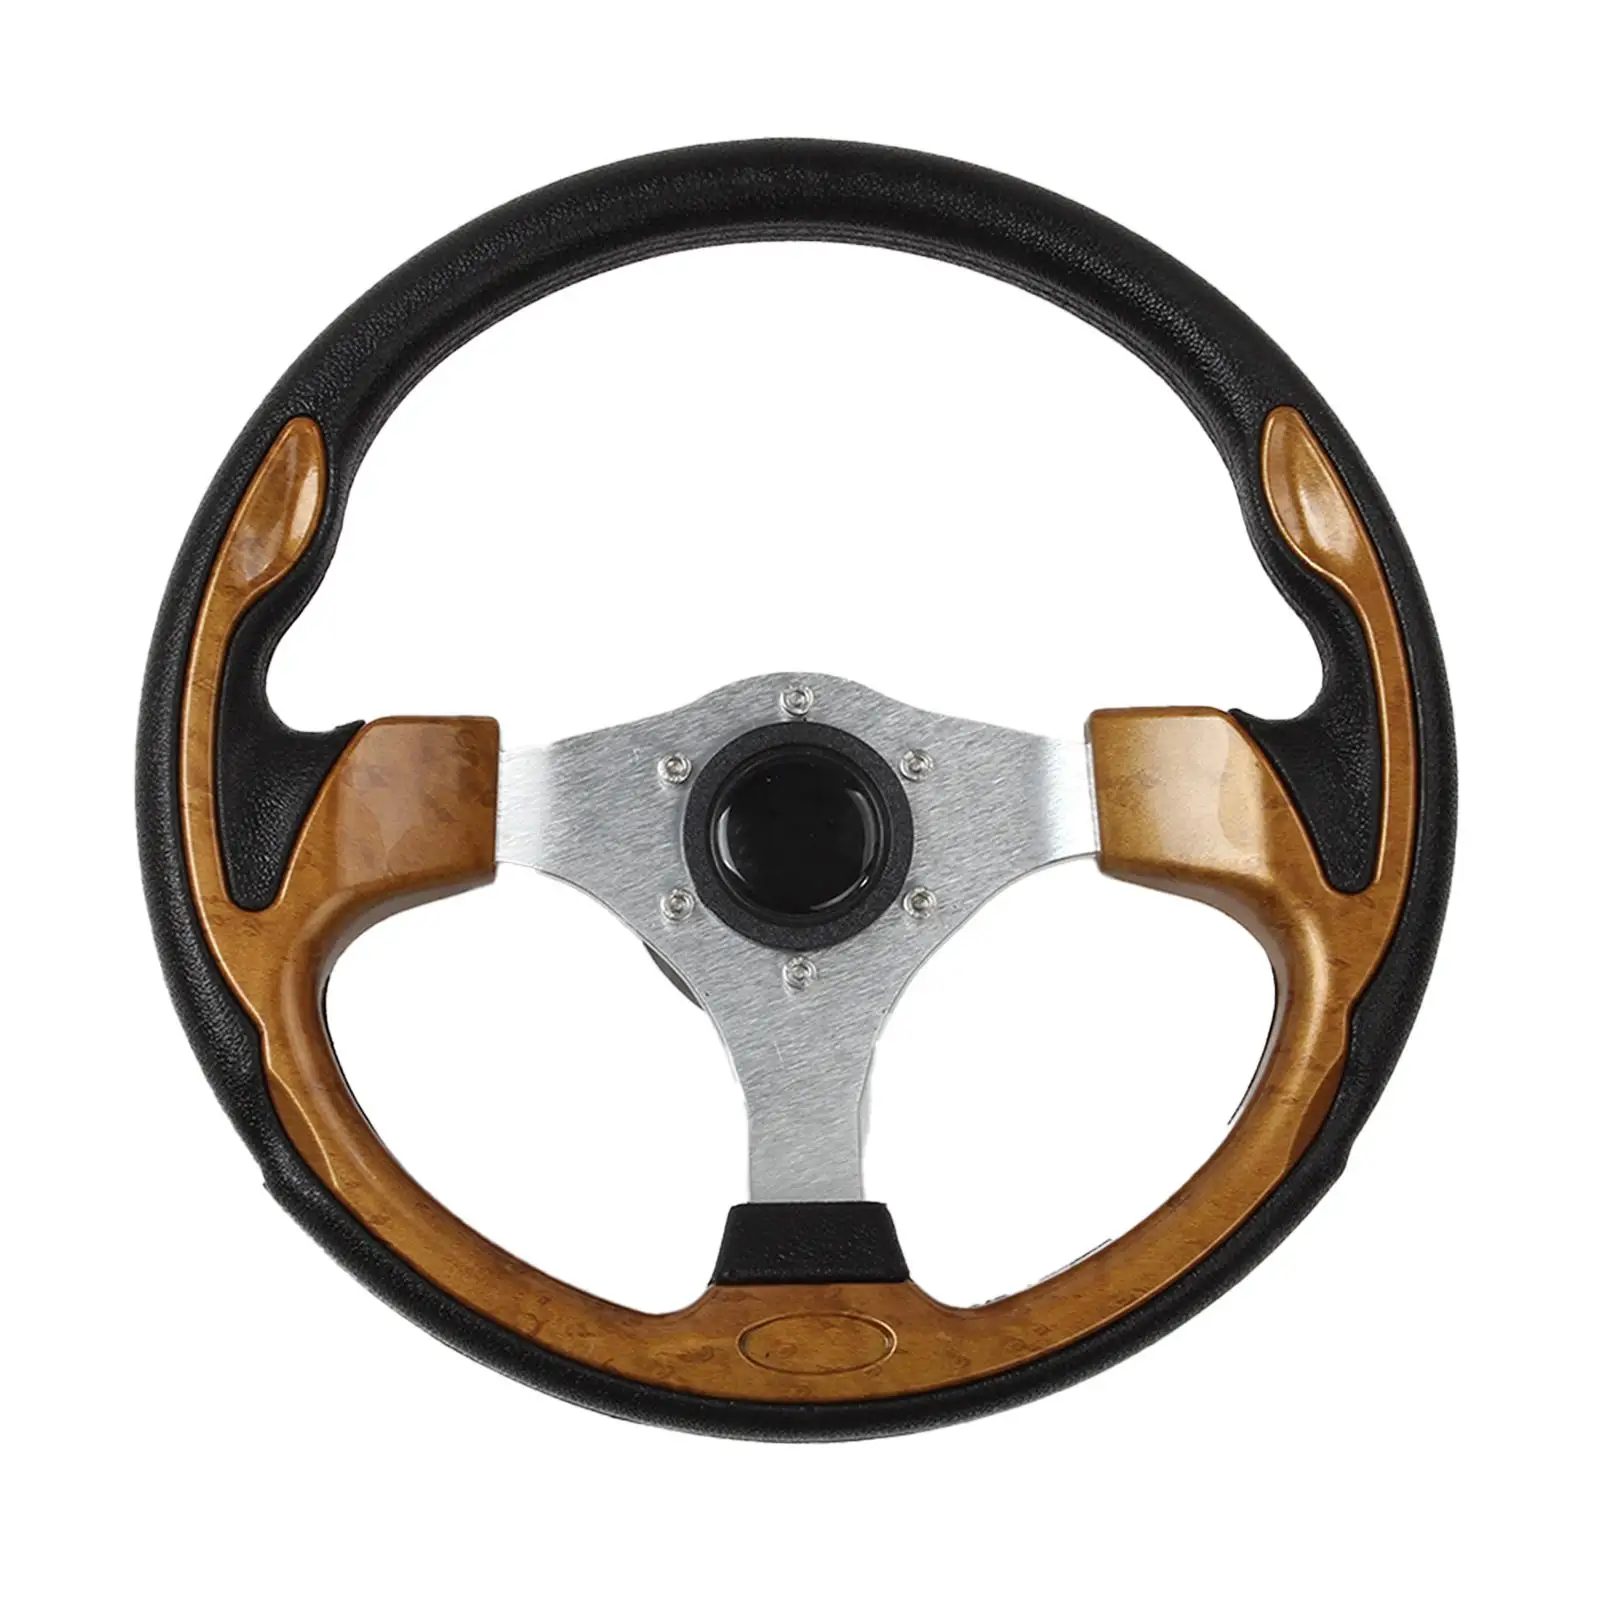 Marine Boat Steering Wheel Fine Workmanship Convenient Assemble Accessory Durable 3 Spoke for Marine Boats Yachts Devices ball base release track base   for inflatable boats for canoes for yachts approx 57g 2 0oz brand new durable